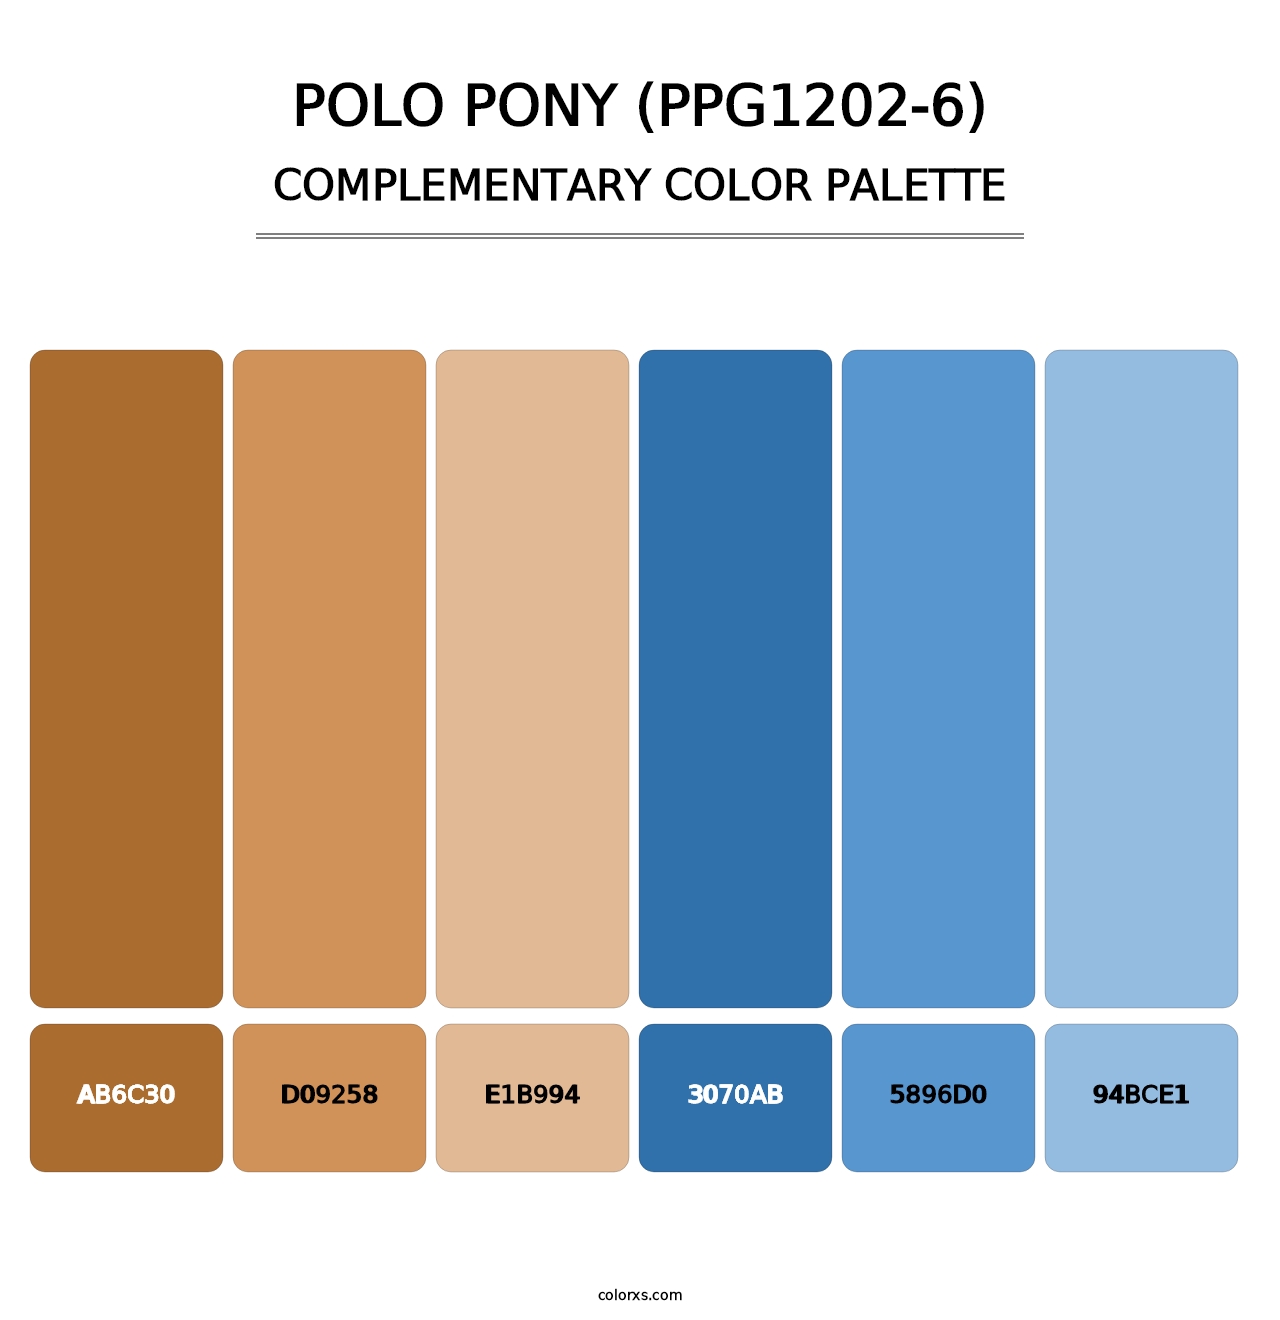 Polo Pony (PPG1202-6) - Complementary Color Palette